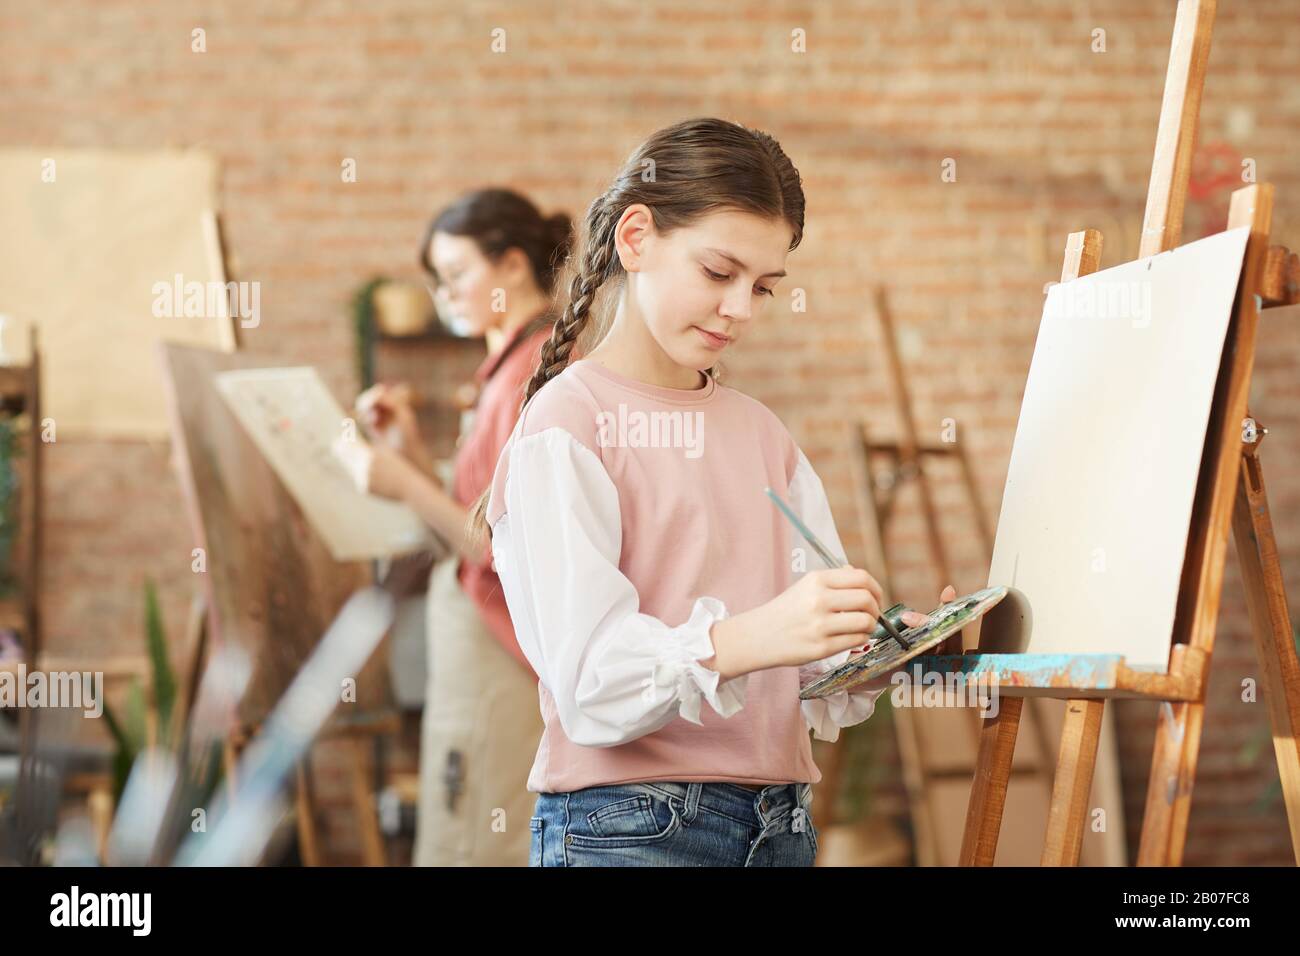 Young girl in casual clothing learning to paint on easel during her lesson at art studio Stock Photo